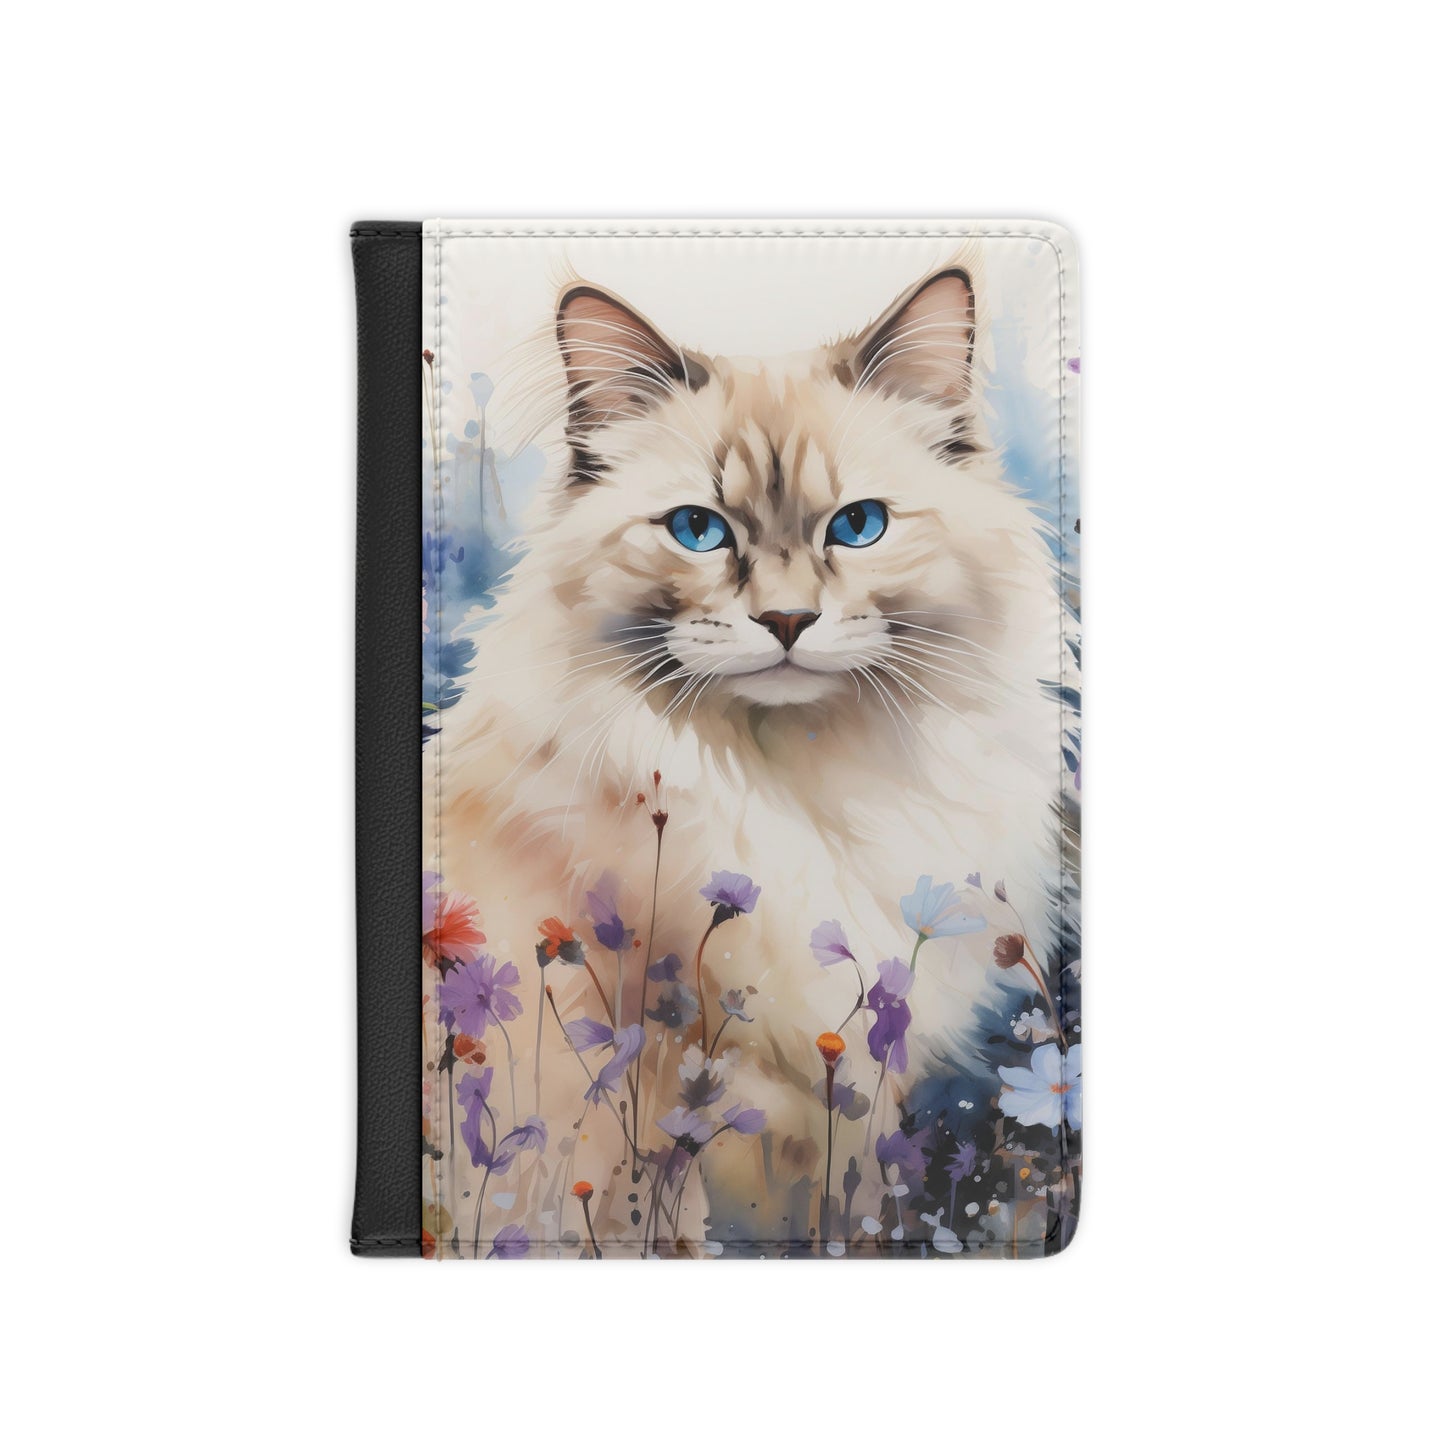 Passport Cover Wallet, Ragdoll Cat Watercolor Print, Faux Leather, RFID Blocking, 3.9" x 5.8"